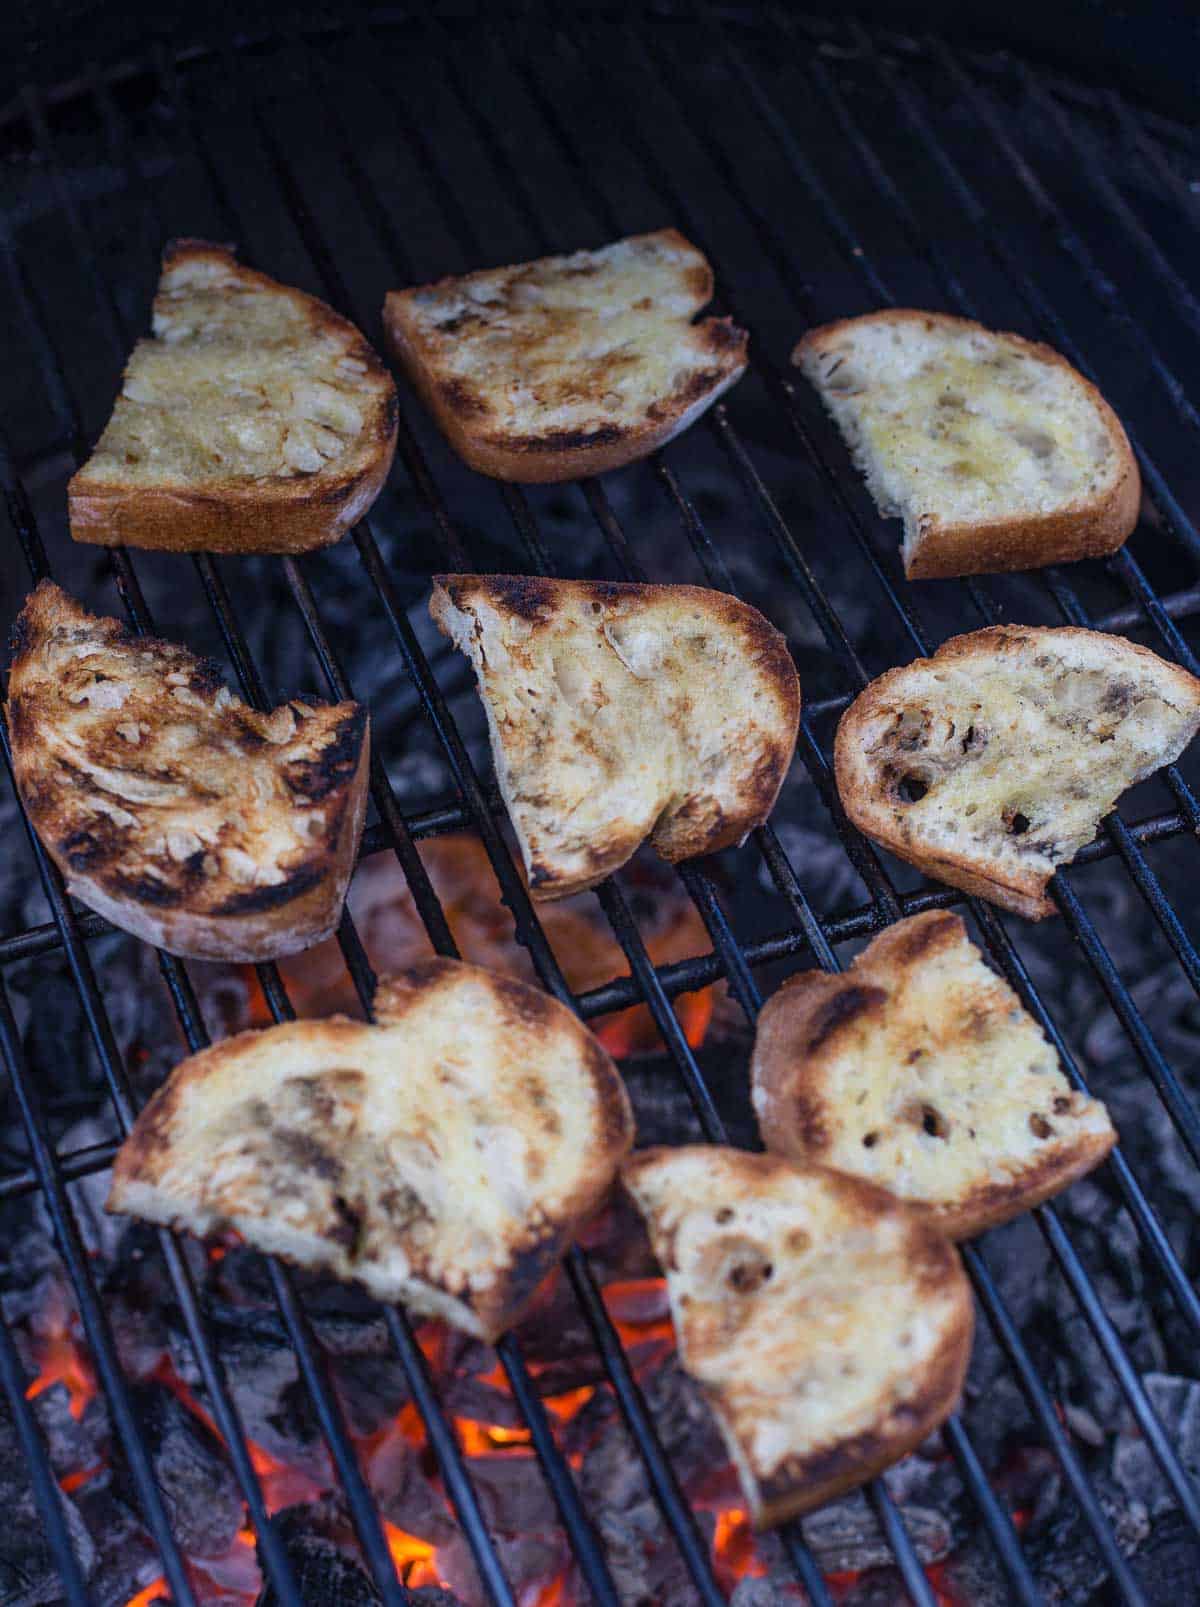 Grilling bread slices over a hot grill